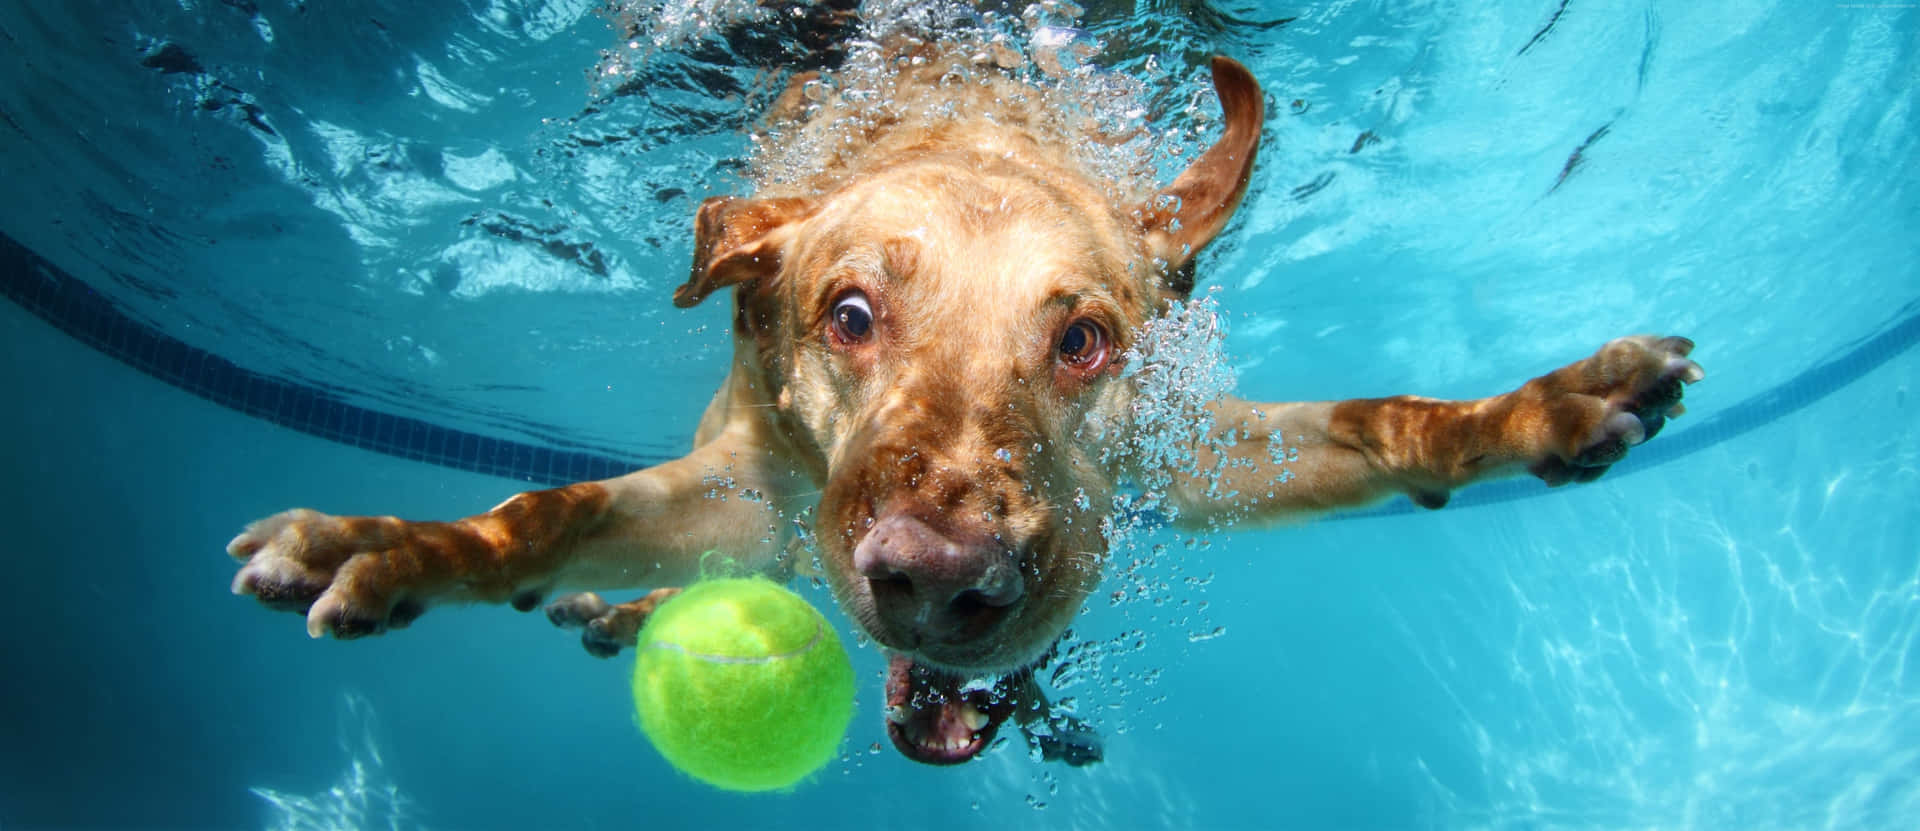 Funny Dog Underwater With Ball